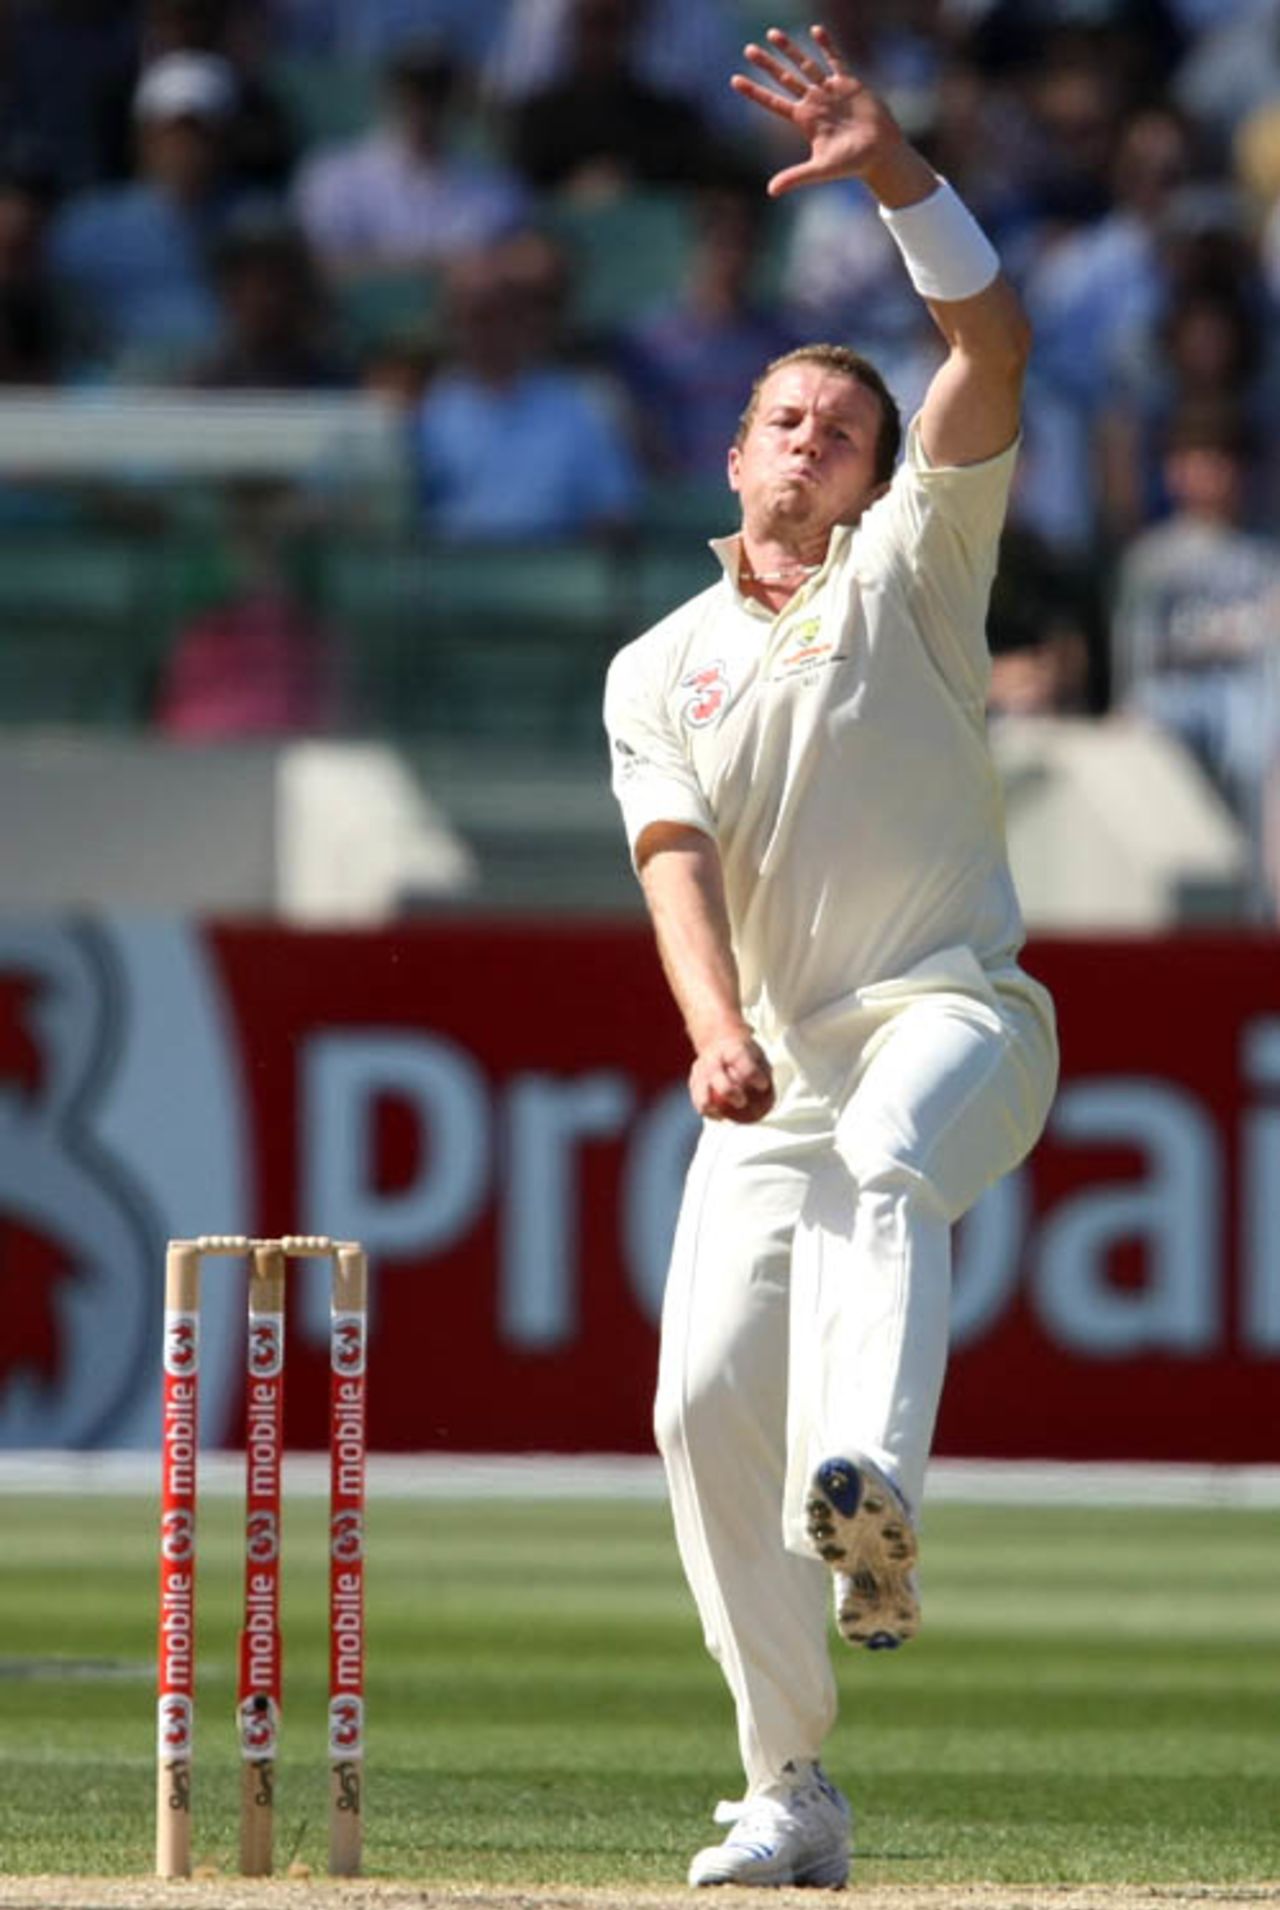 Peter Siddle winds up to deliver the ball, Australia v South Africa, 2nd Test, Melbourne, 2nd day, December 27, 2008